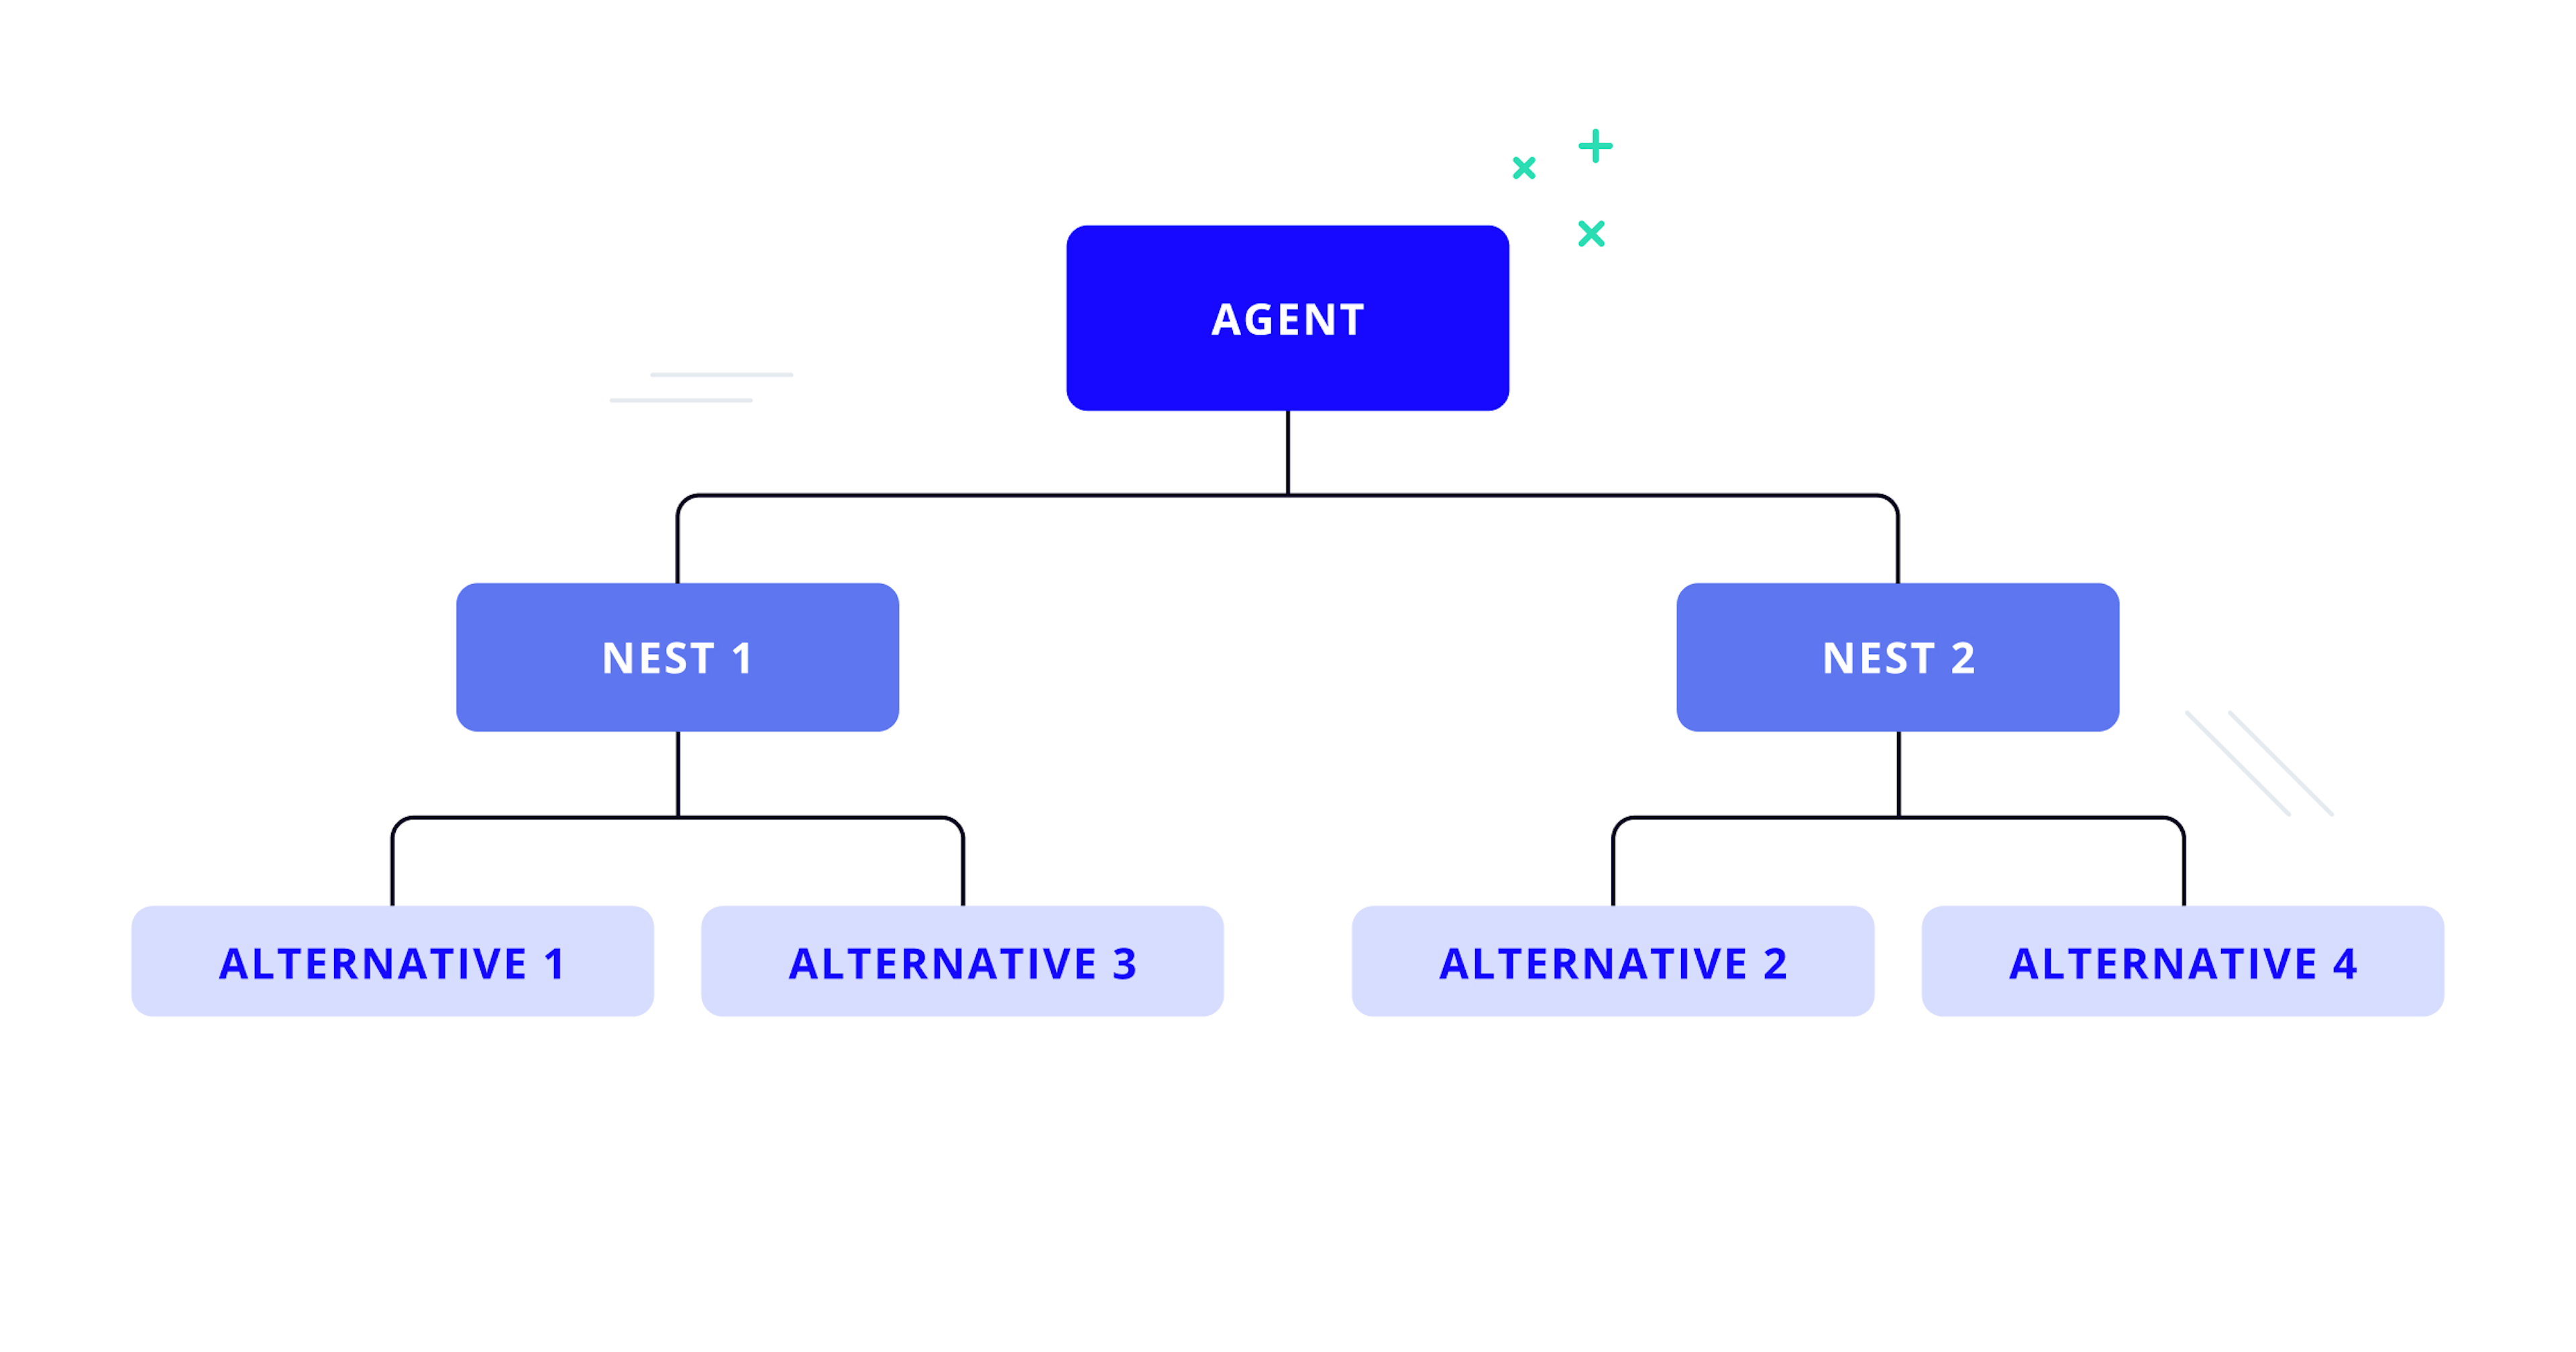 Two-level tree diagram from one agent to two nests.